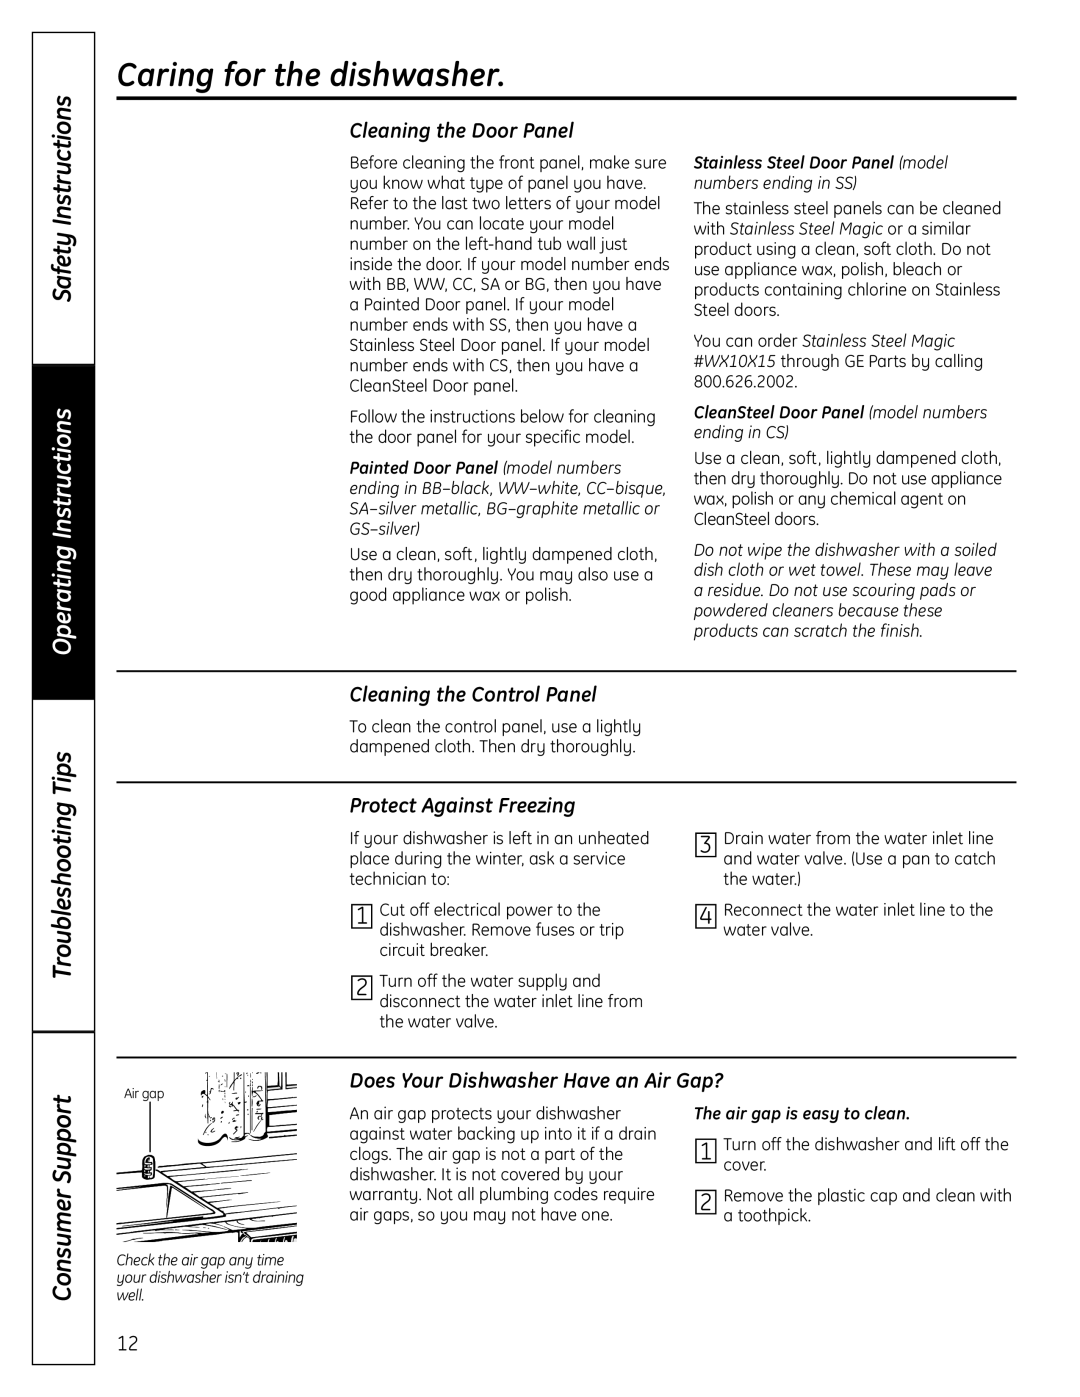 GE GLDL500 owner manual Caring for the dishwasher, Safety Instructions, Troubleshooting, Cleaning the Door Panel, Tips 